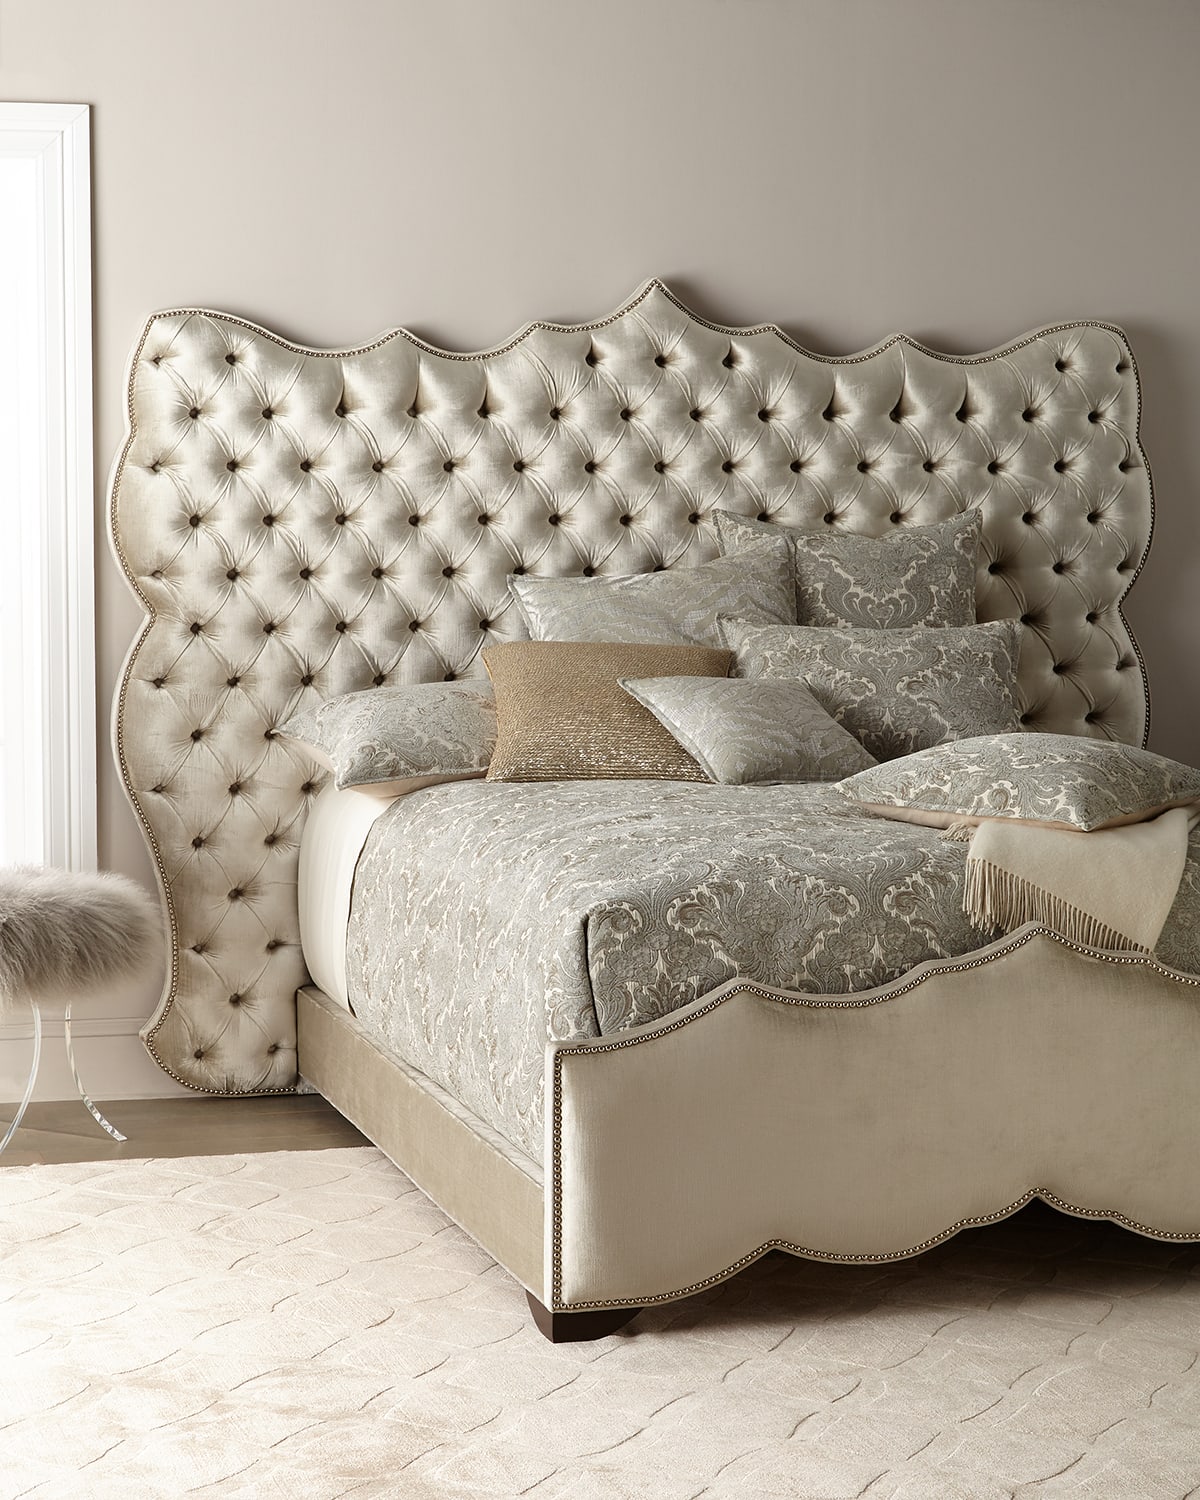 Haute House Samara Tufted King Bed In Silver